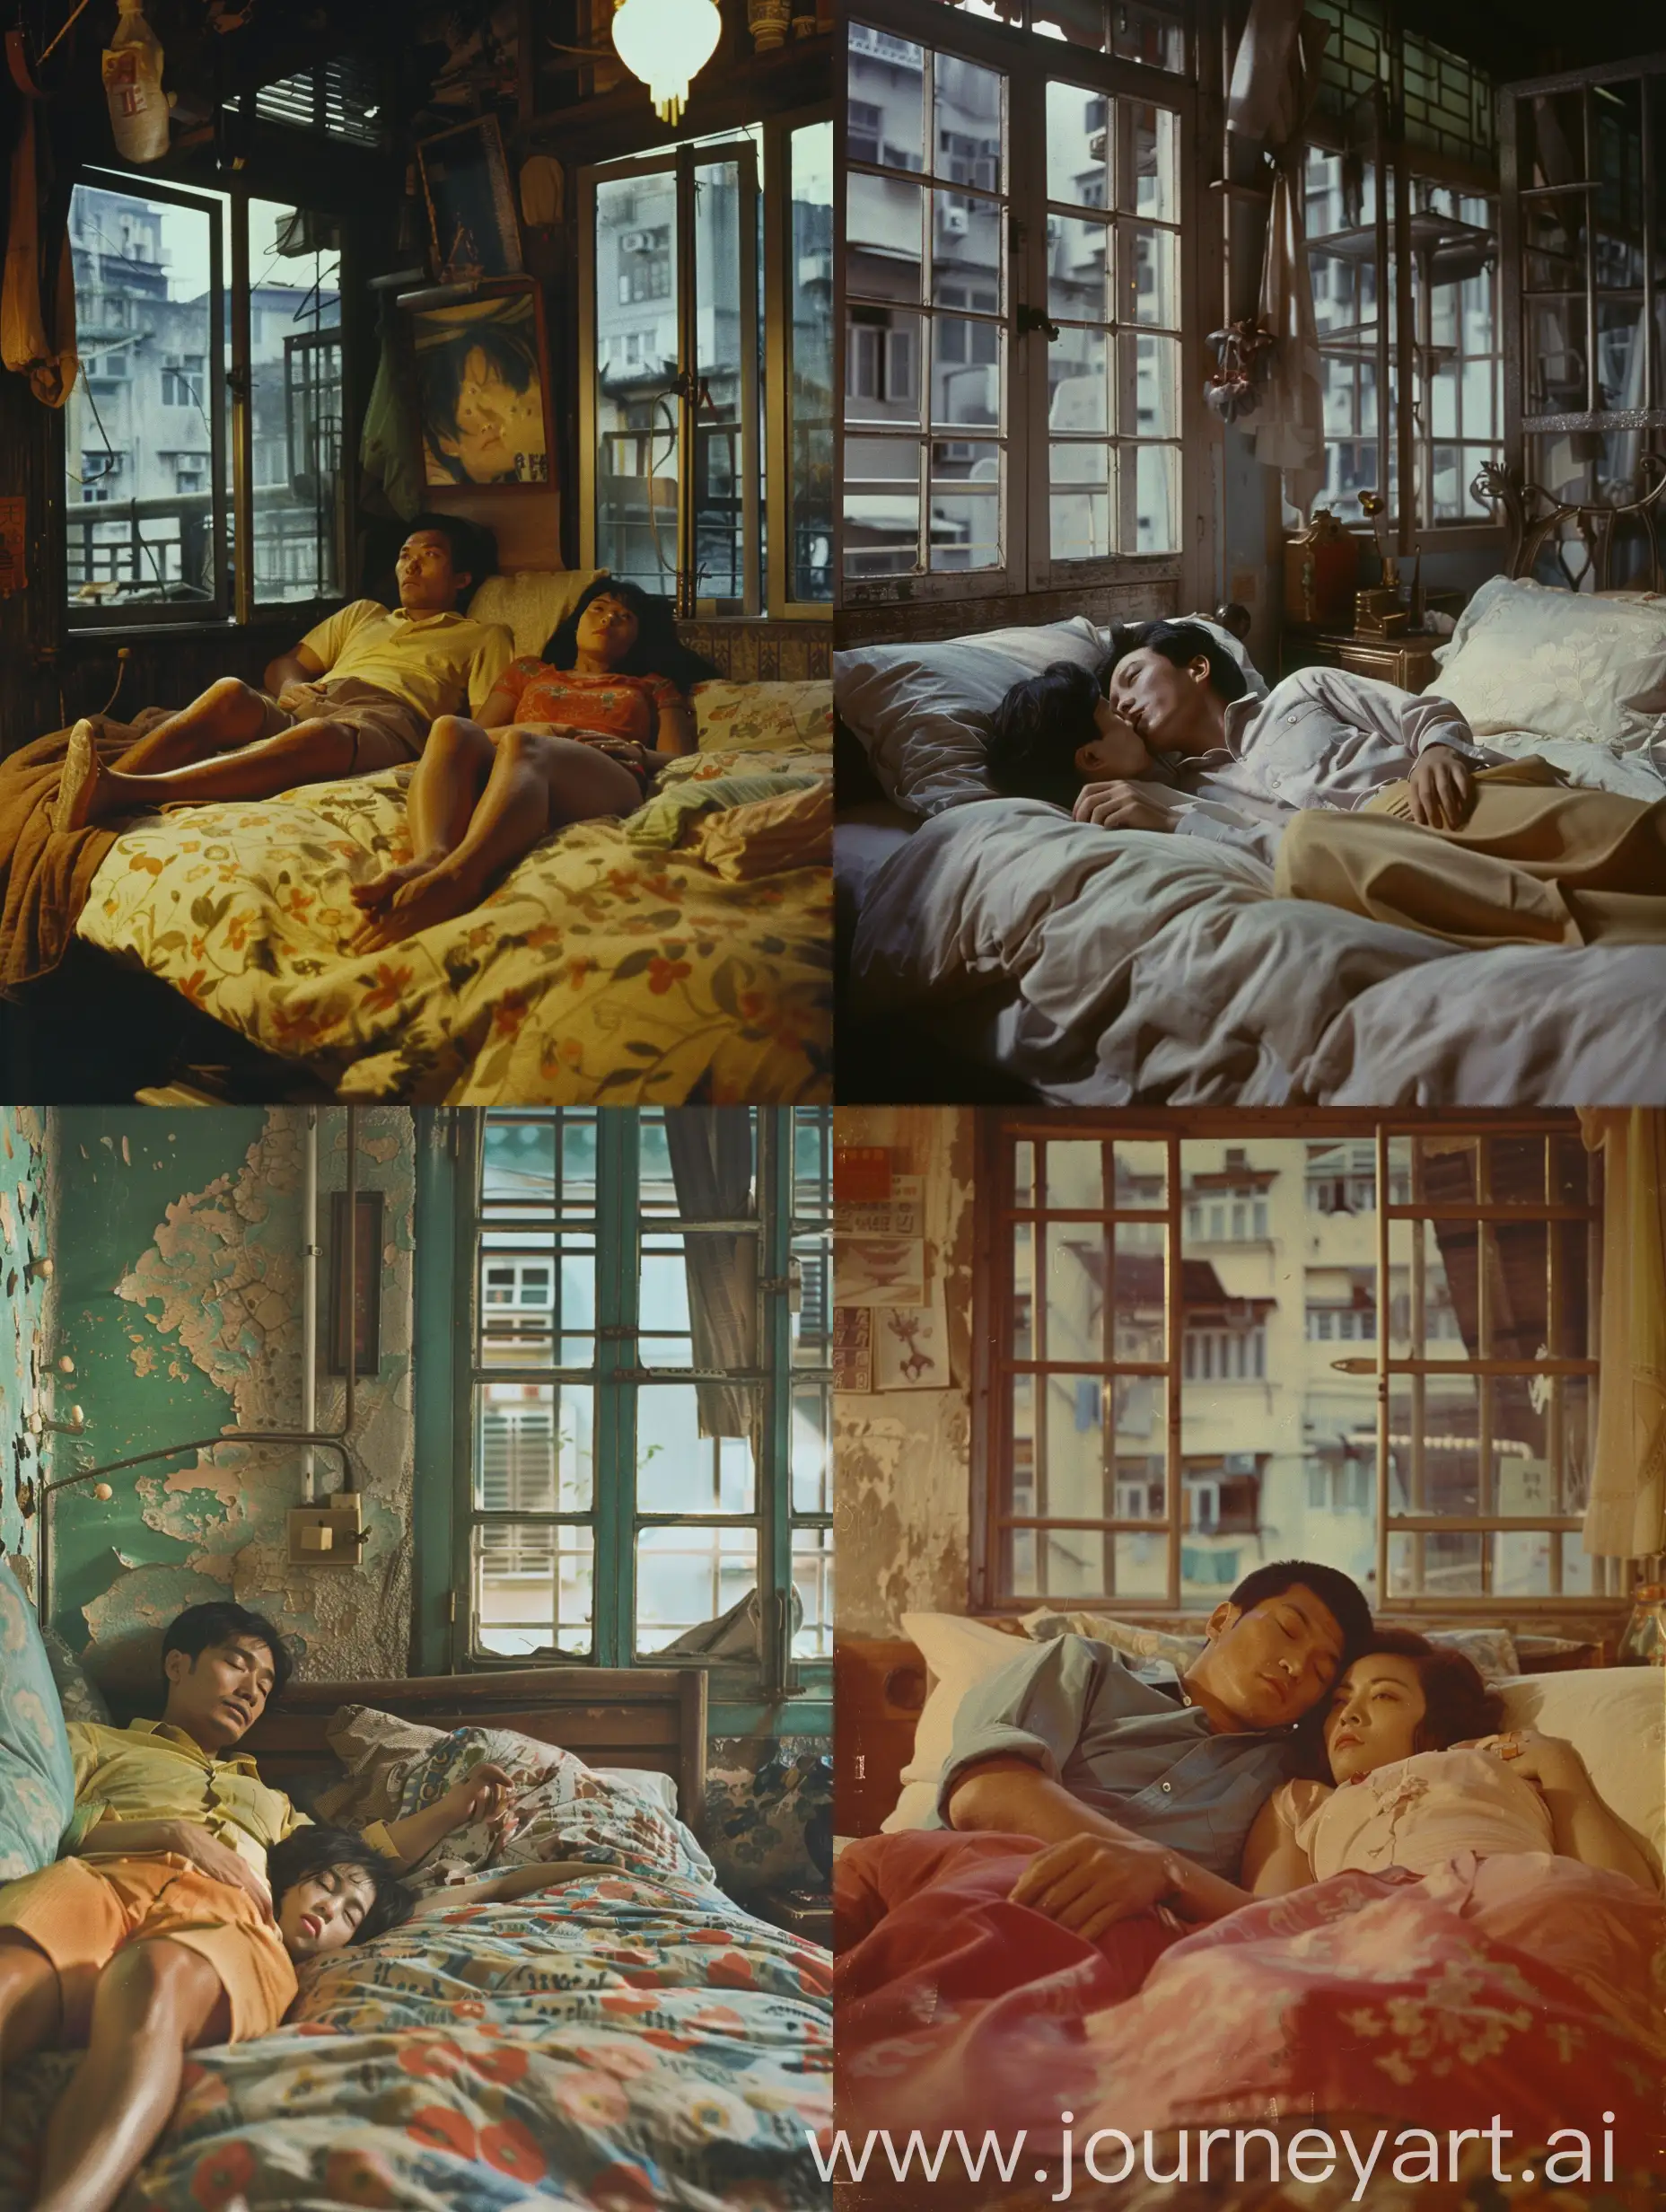 Film still, 1 man and 1 woman lying on the bed, Hong Kong 1960s, old-style architecture, directed by Wong Kar-wai, photographed by Christopher Doyle